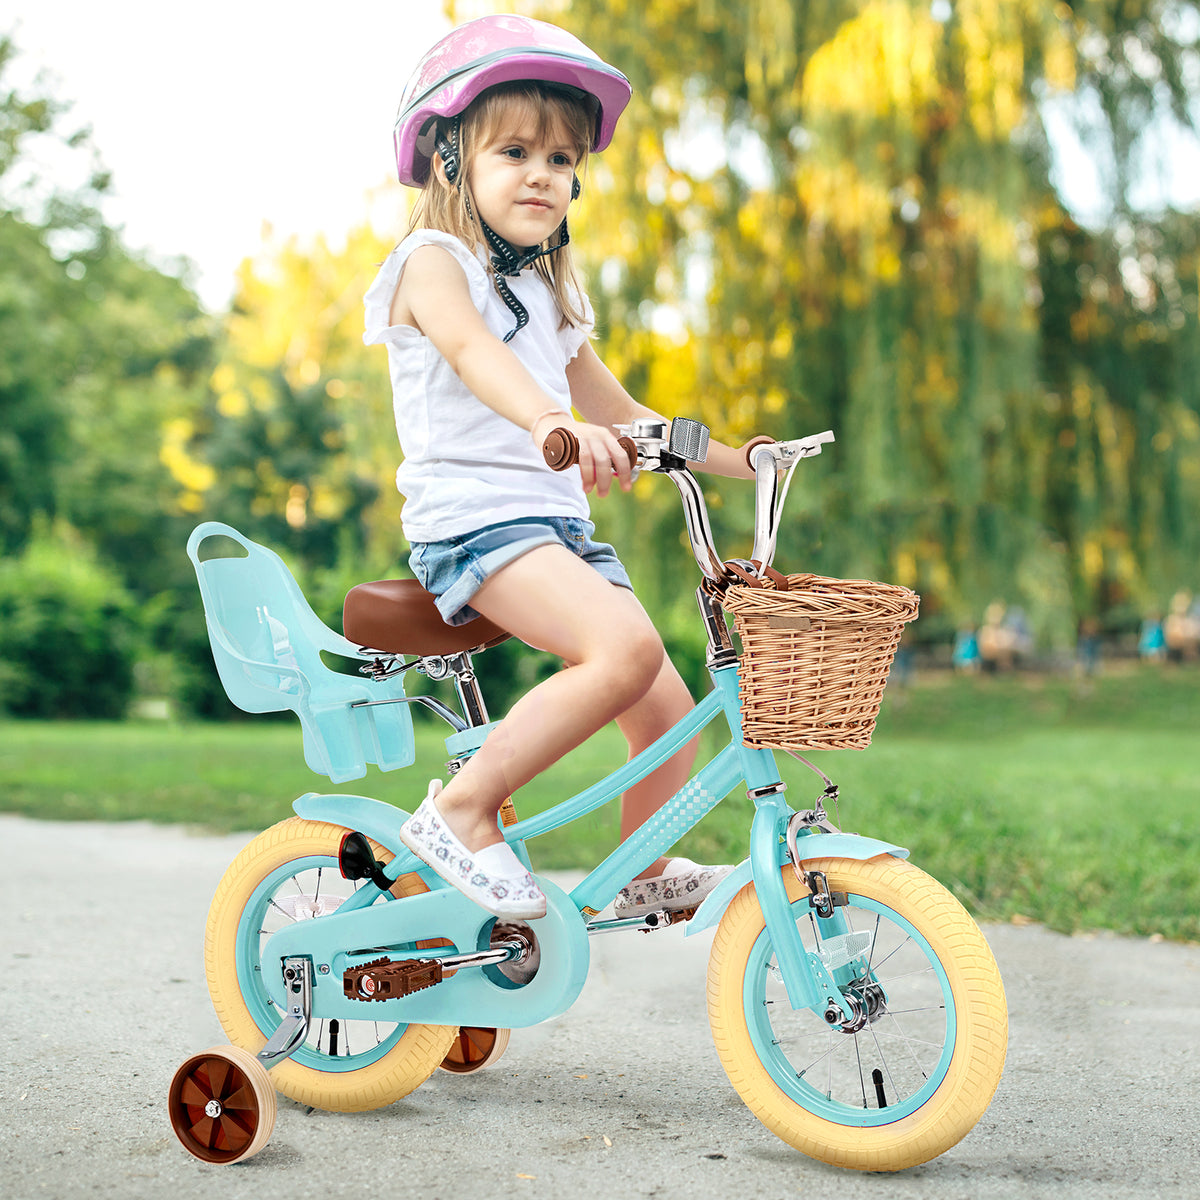 XJD Kids Bicycle for Toddlers and Children 2-12 Years Old, 12 14 16 20 inch Bike for Girls and Boys, with Basket and Bell Training Wheels, Adjustable Seat Handlebar Height, Blue